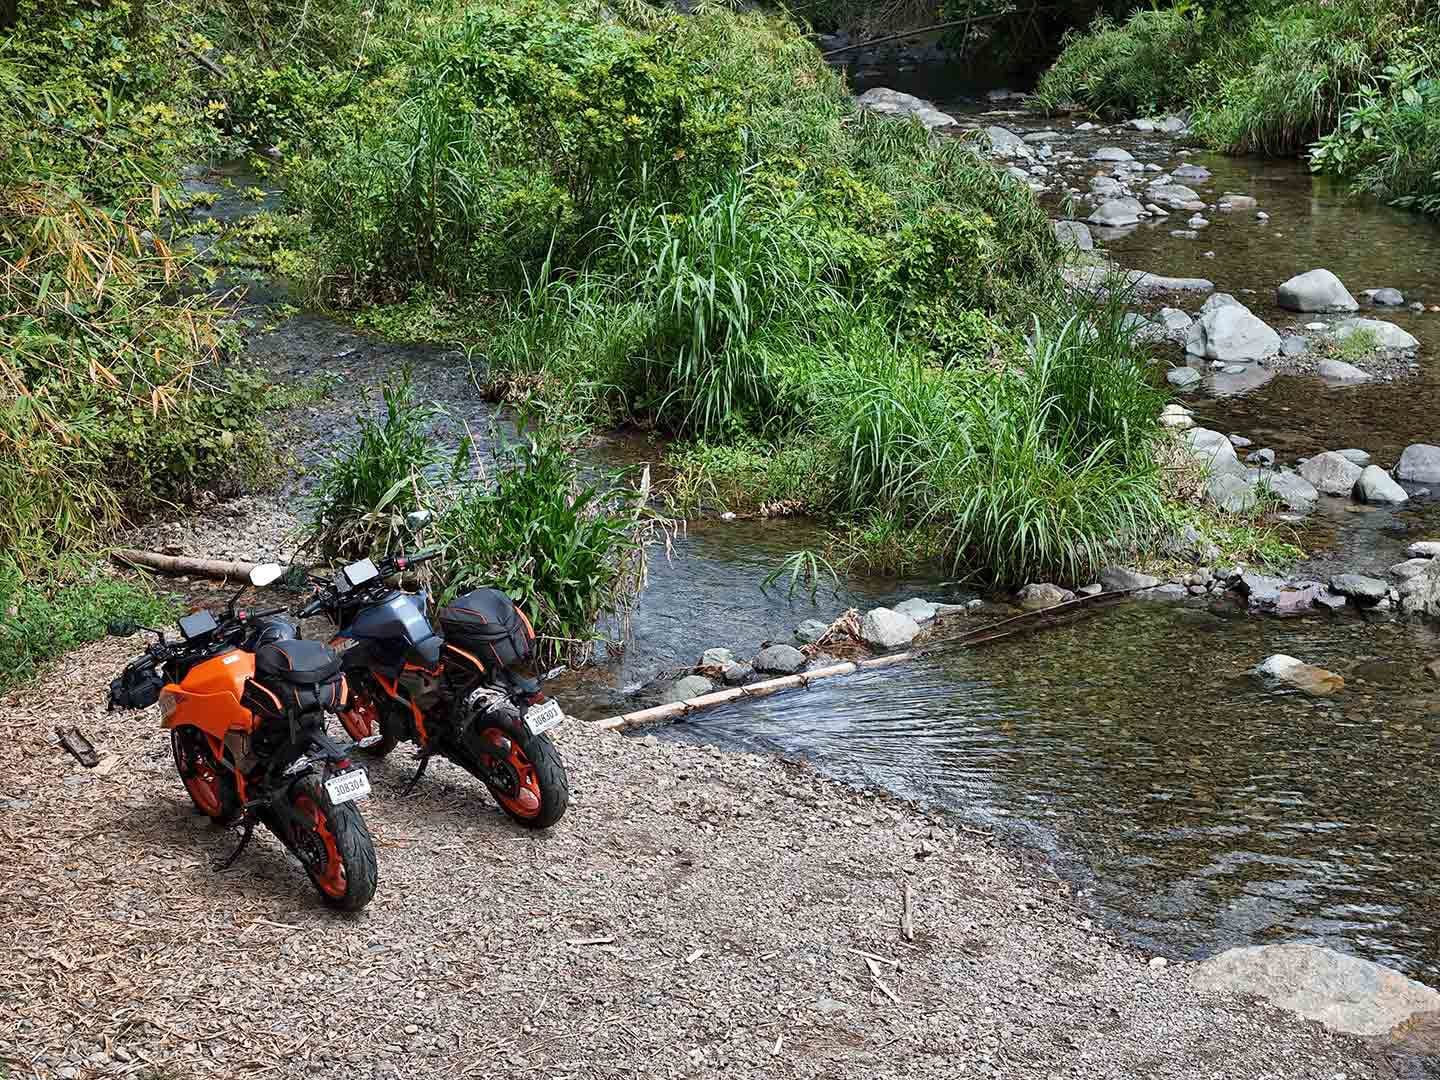 Toss on some KTM accessory luggage and the 390 Duke instantly transforms into a light-duty touring rig.